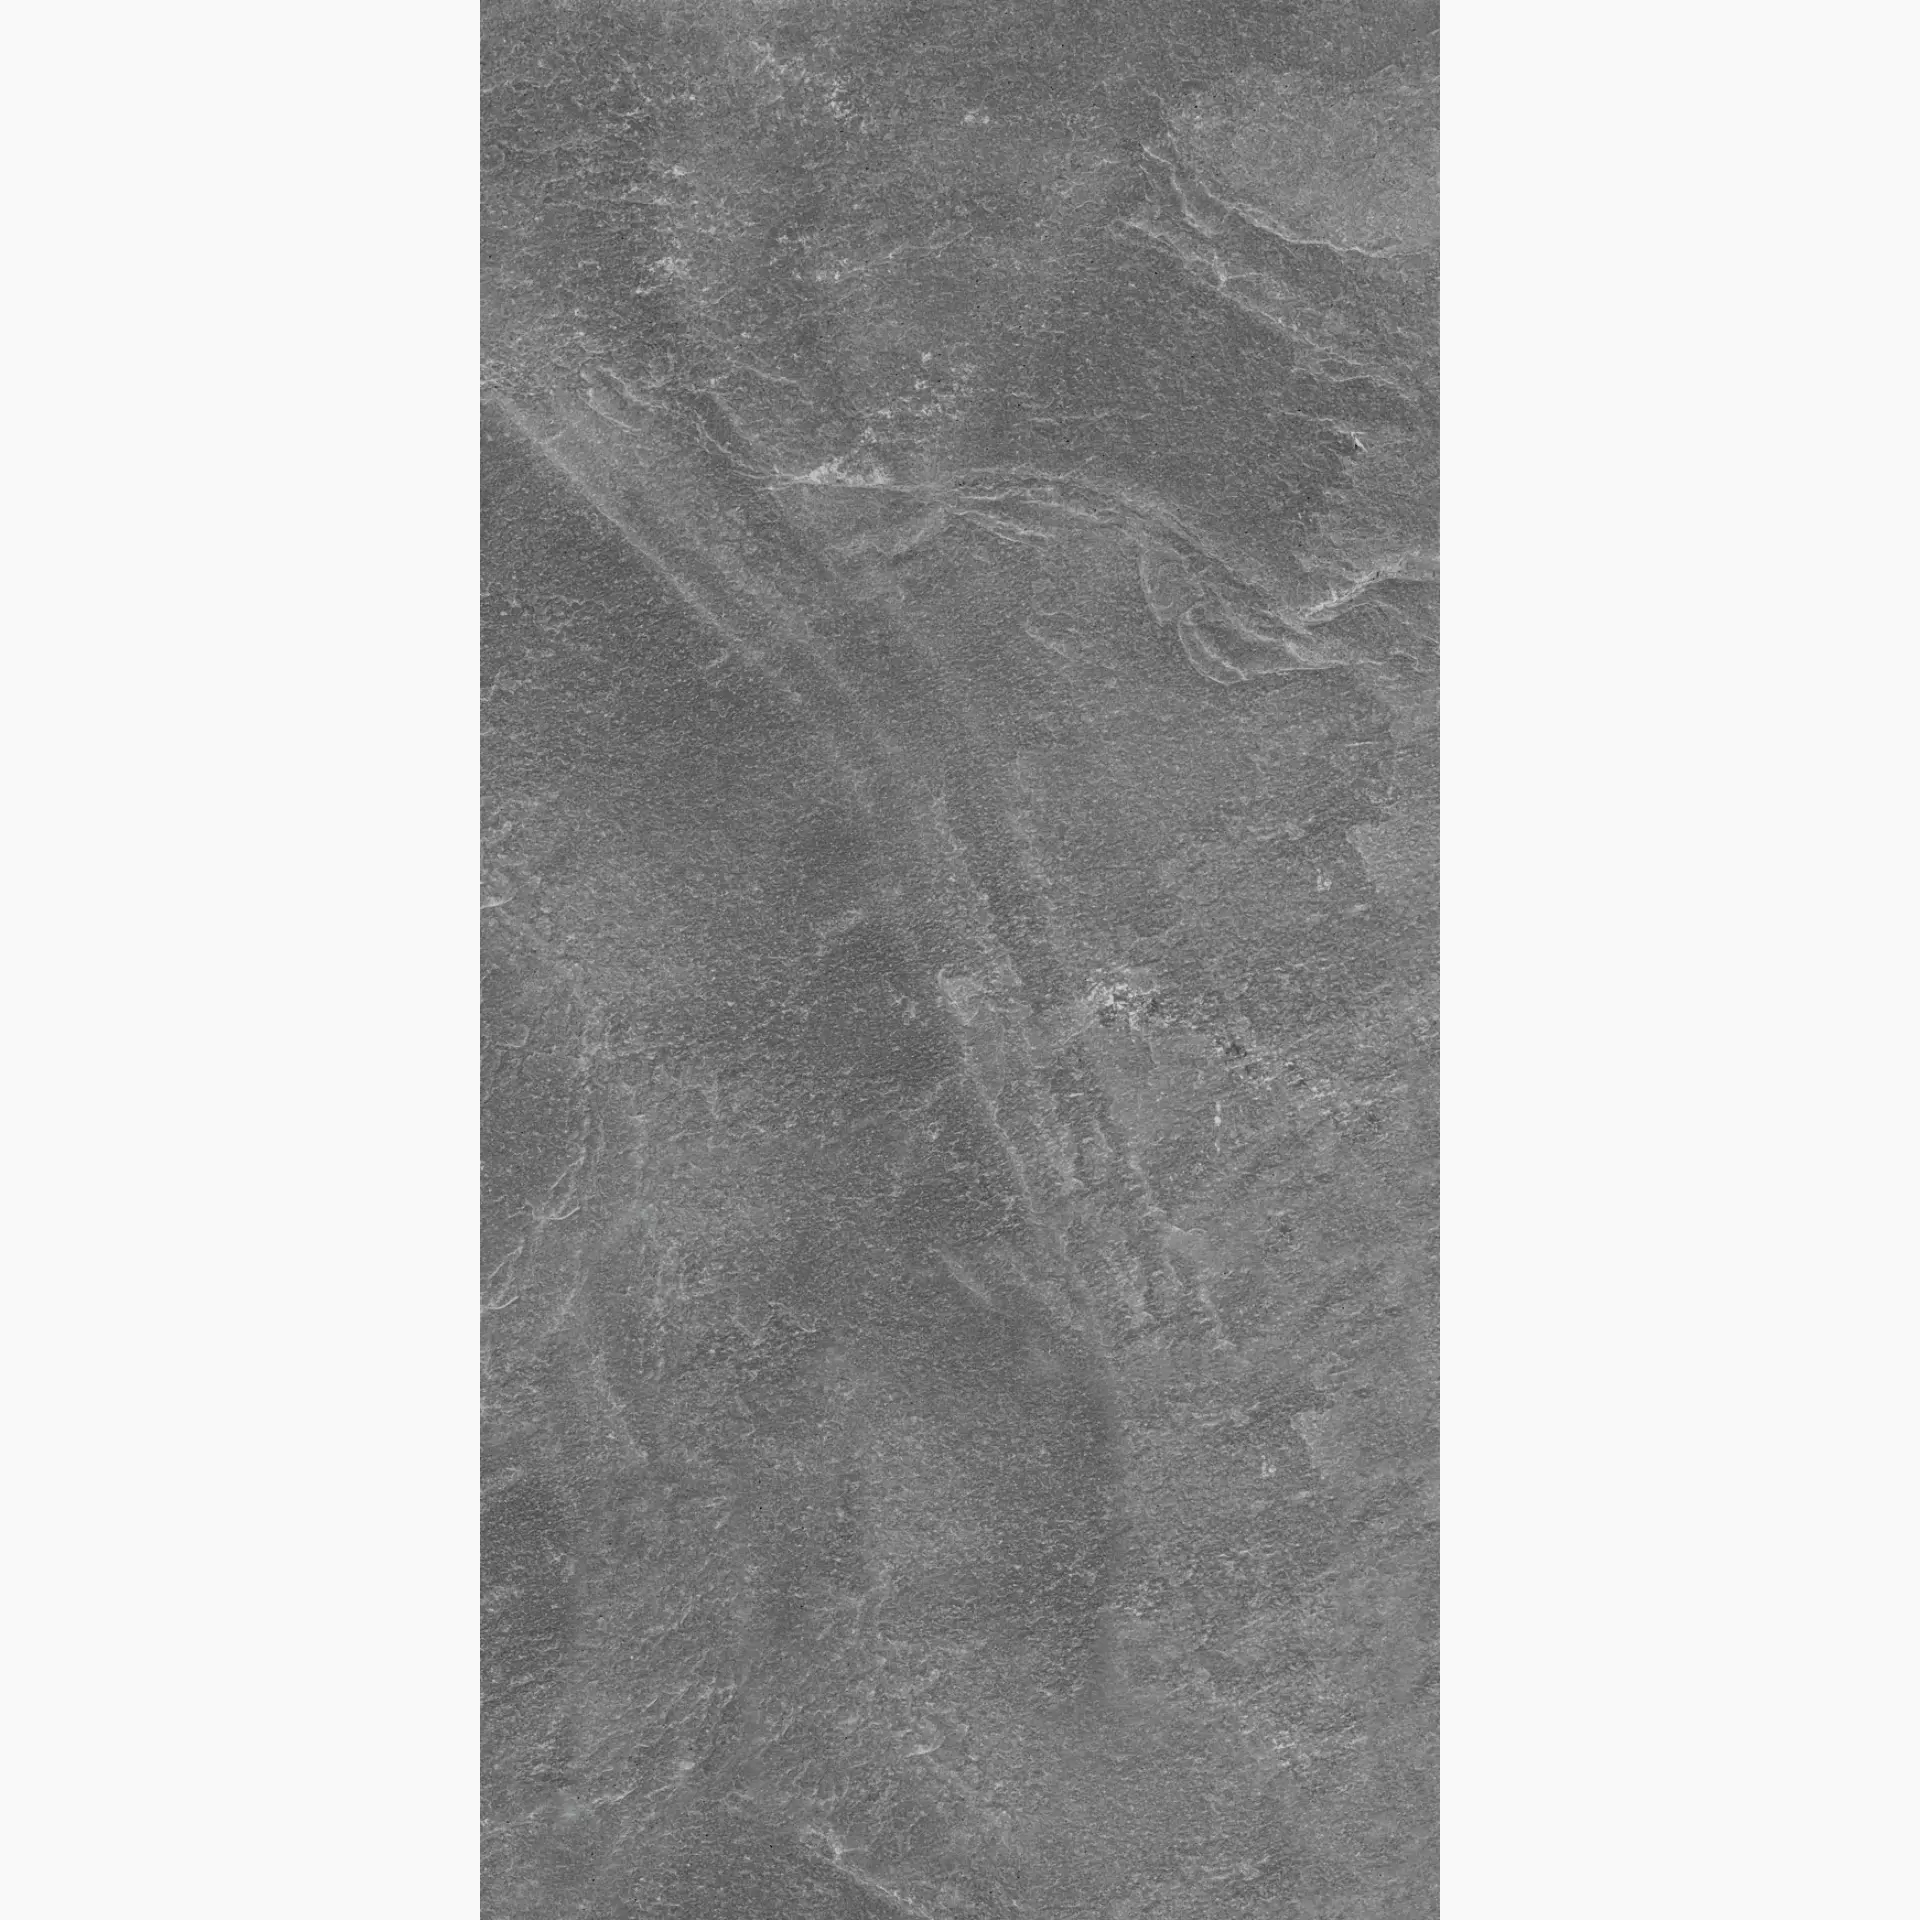 Keope Extreme Anthracite Strutturato 424E5933 45x90cm rectified 20mm